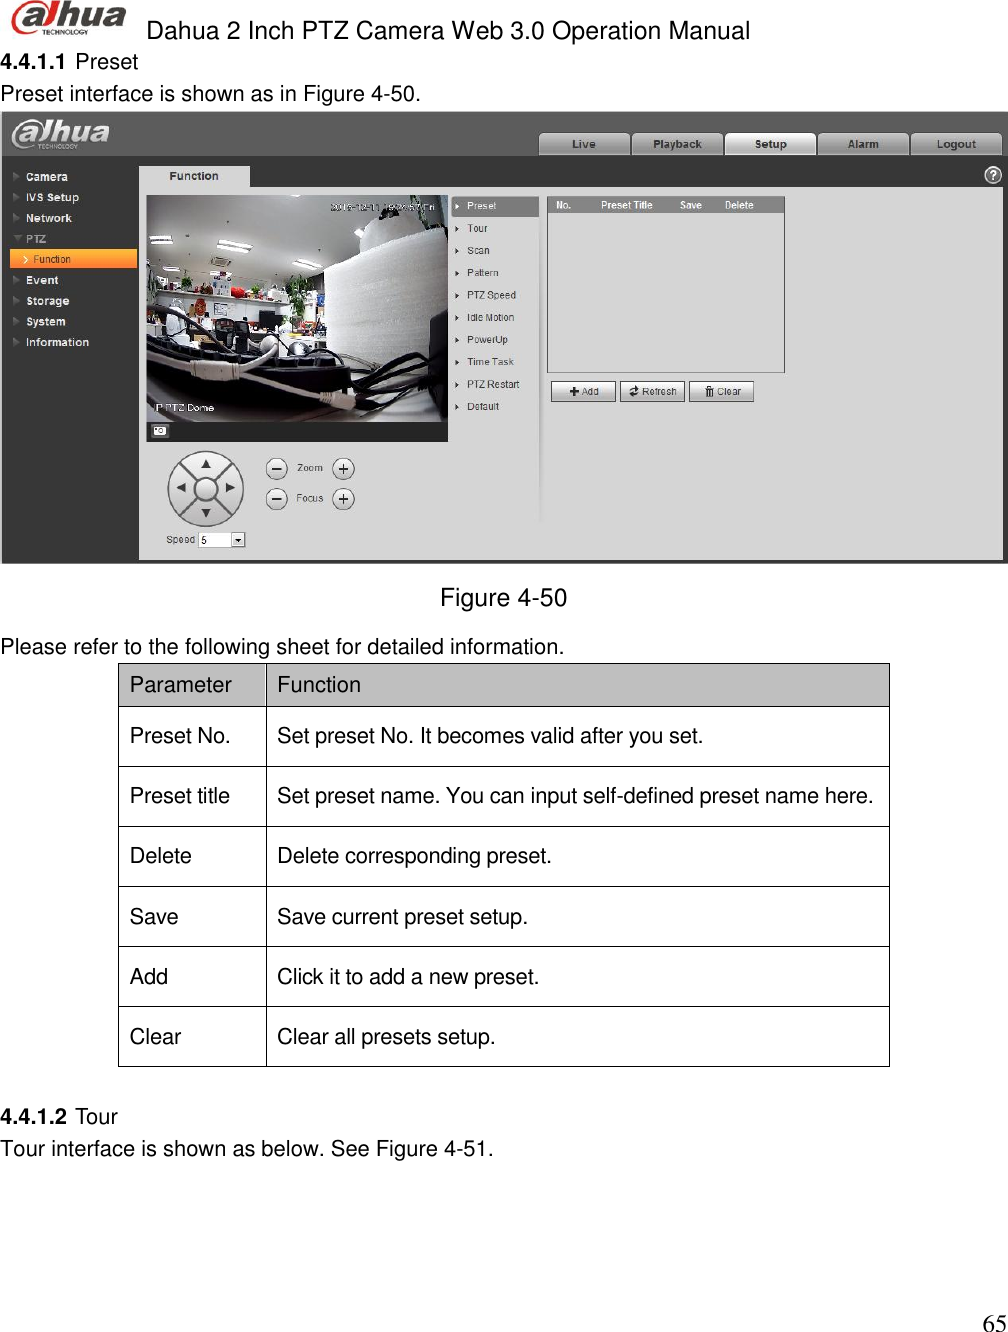  Dahua 2 Inch PTZ Camera Web 3.0 Operation Manual                                                                             65 4.4.1.1 Preset  Preset interface is shown as in Figure 4-50.  Figure 4-50 Please refer to the following sheet for detailed information.  Parameter  Function  Preset No. Set preset No. It becomes valid after you set.  Preset title  Set preset name. You can input self-defined preset name here.   Delete  Delete corresponding preset.  Save  Save current preset setup.  Add  Click it to add a new preset.   Clear Clear all presets setup.   4.4.1.2 Tour Tour interface is shown as below. See Figure 4-51. 